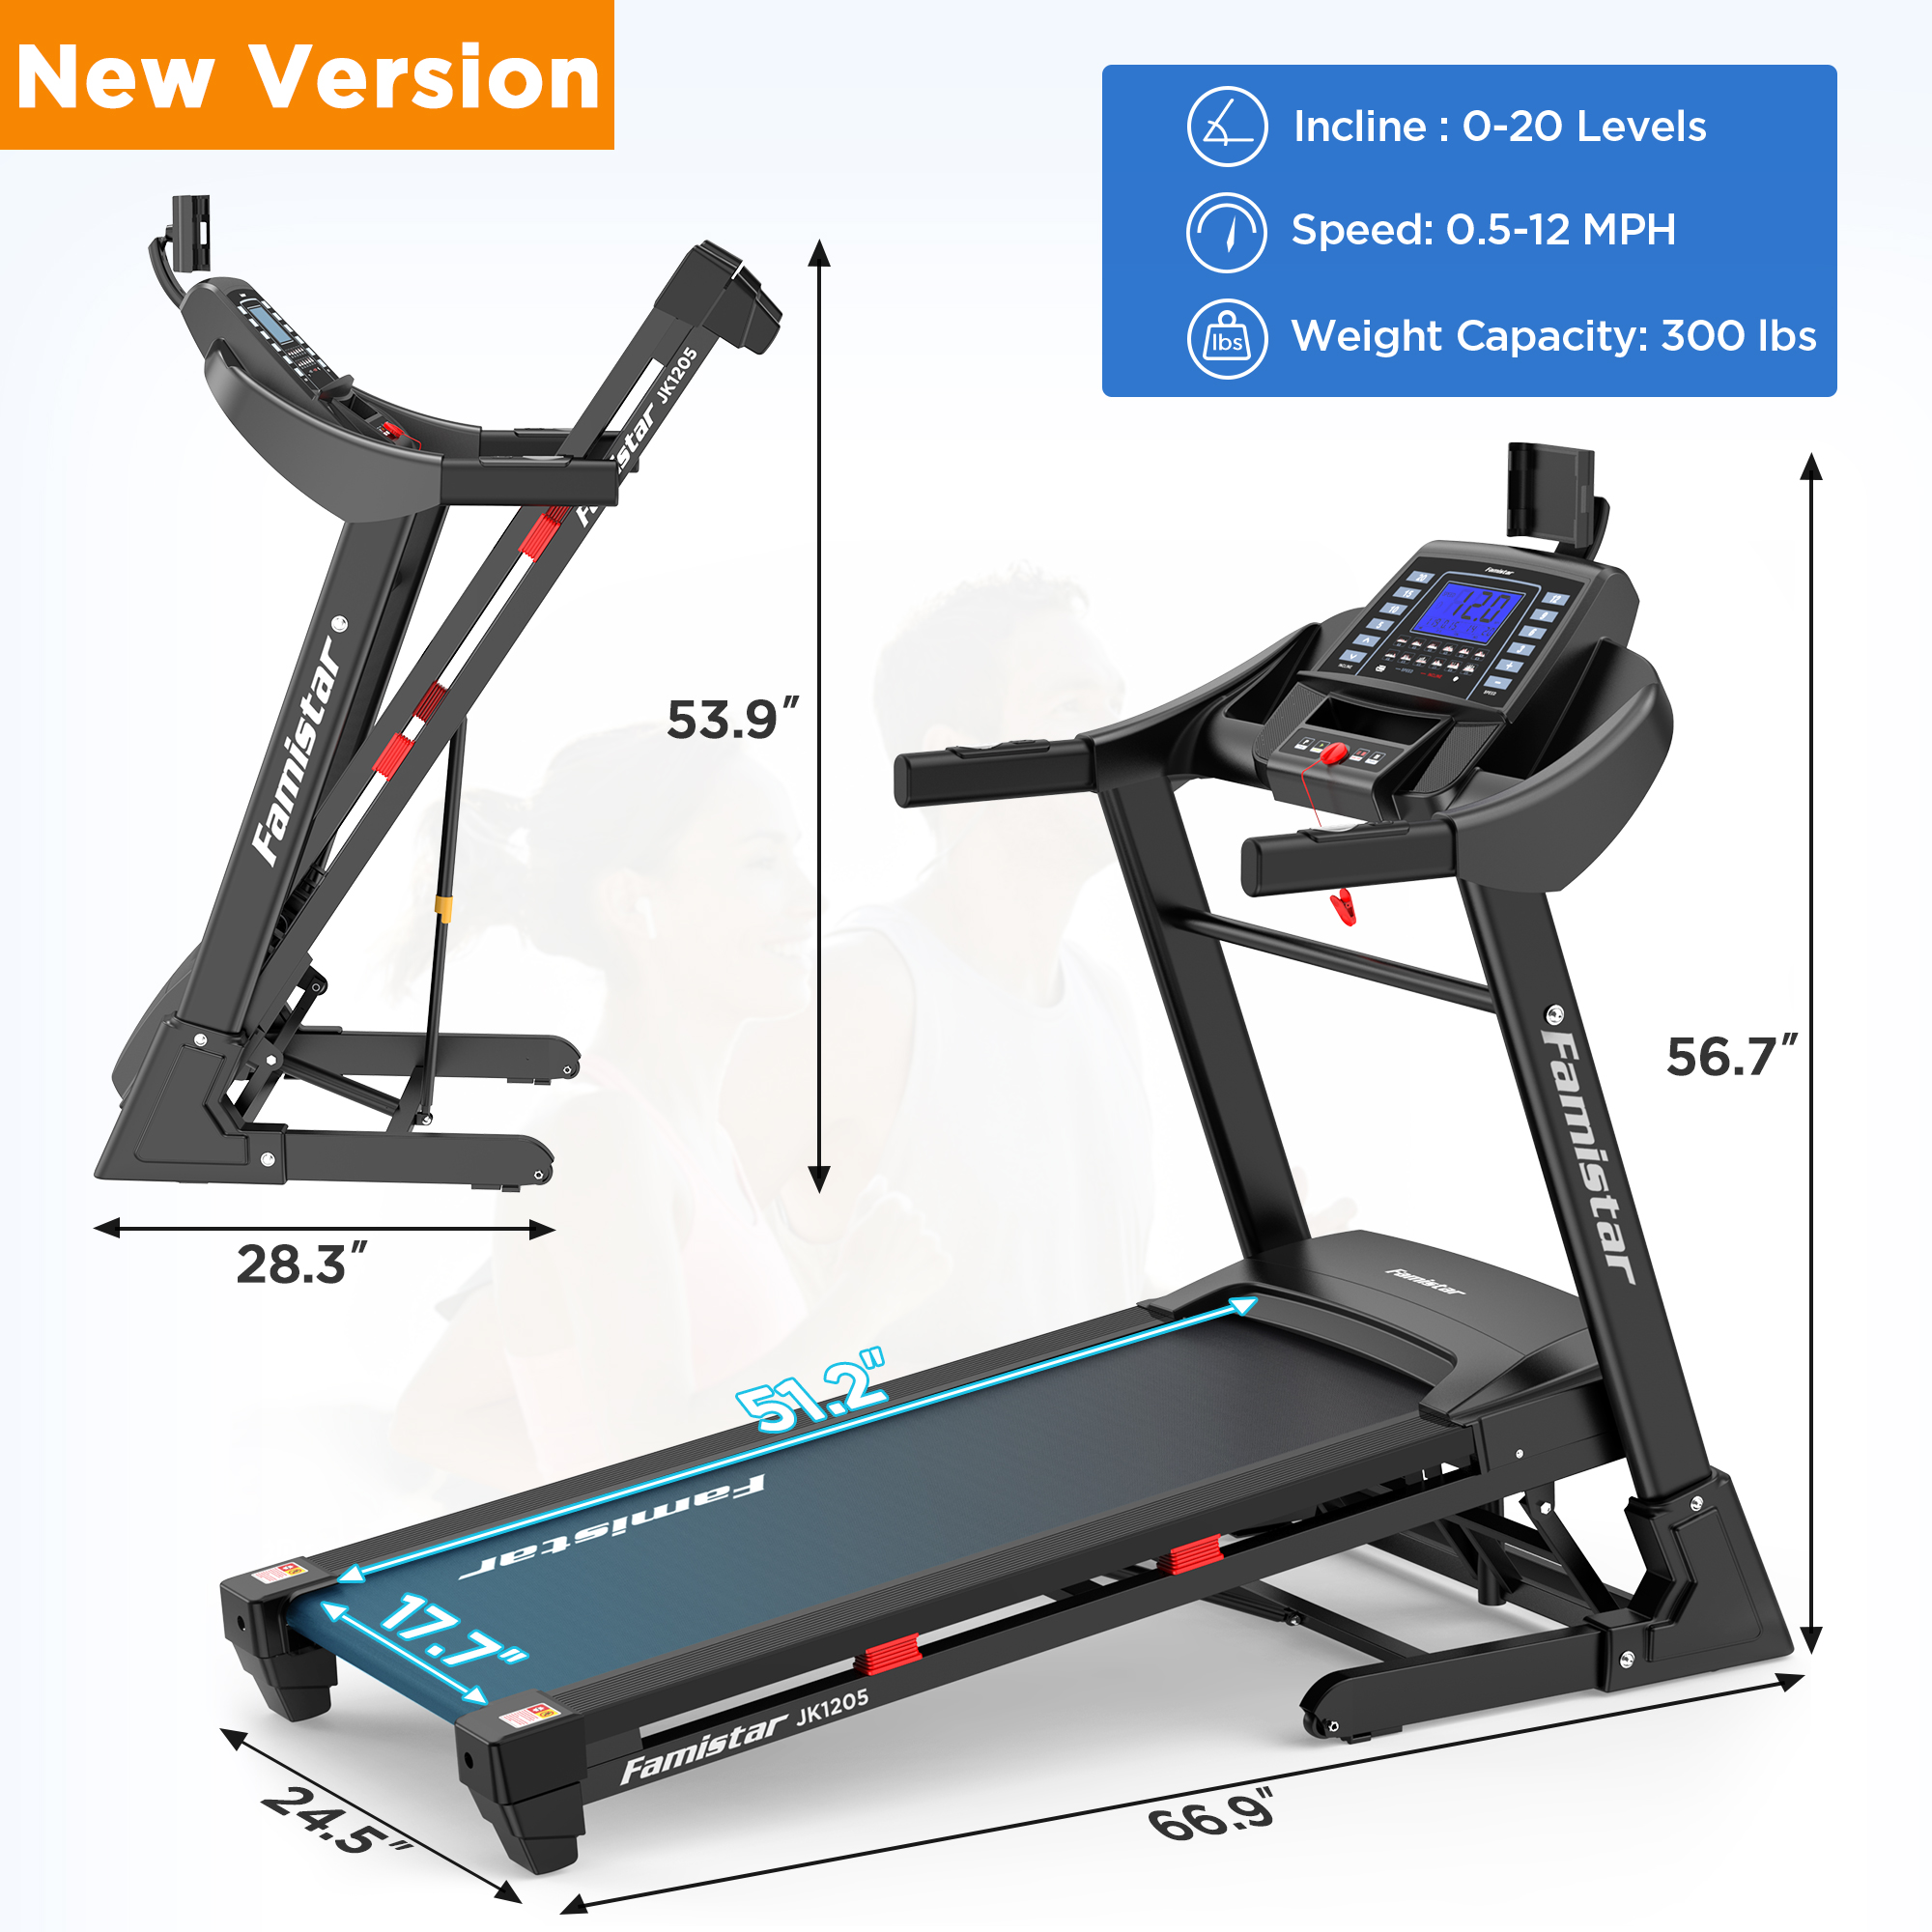 Famistar 4.0HP Folding Treadmill for Home with 20 Levels Auto Incline, 300LB Capacity, 12MPH Speed Controls, New Version - image 3 of 8